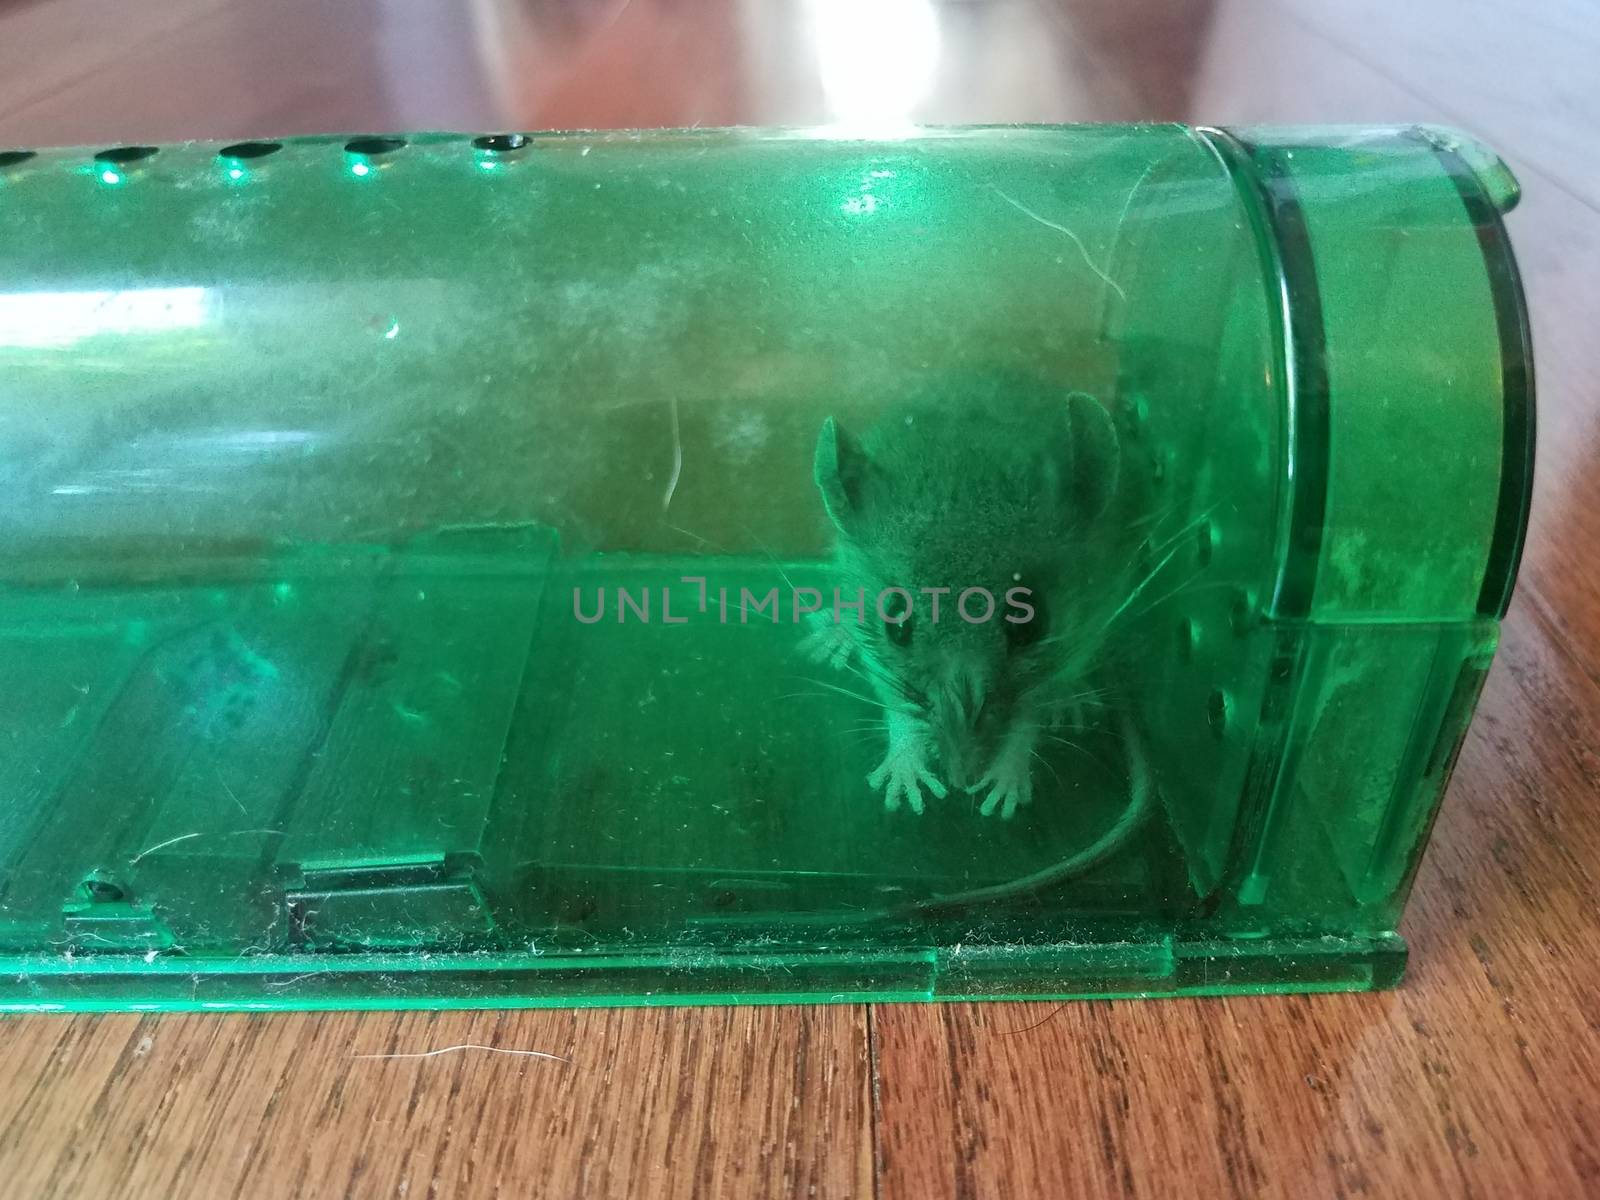 mouse caught in humane green plastic mousetrap in home by stockphotofan1